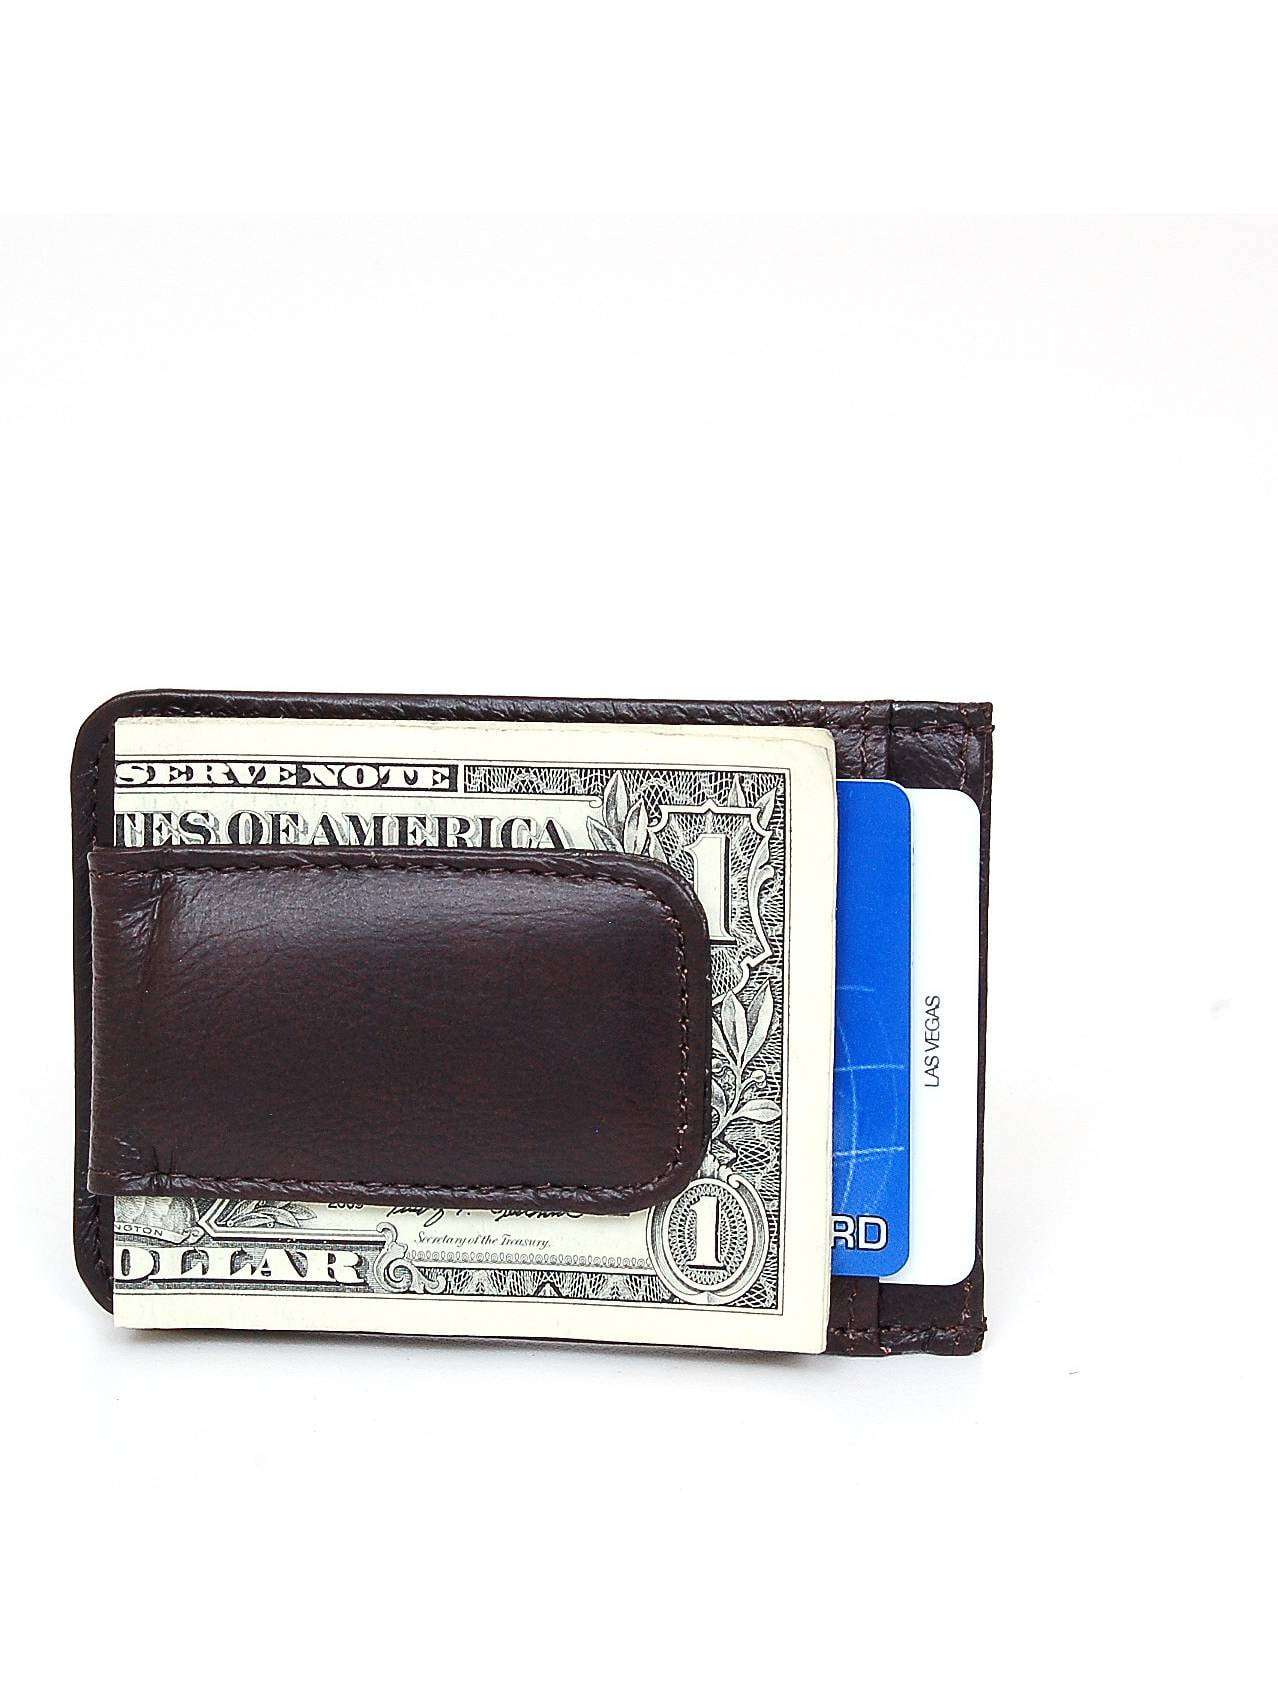 Leather Money Clip Wallet. Mens Wallet With Money Clip. Slim 